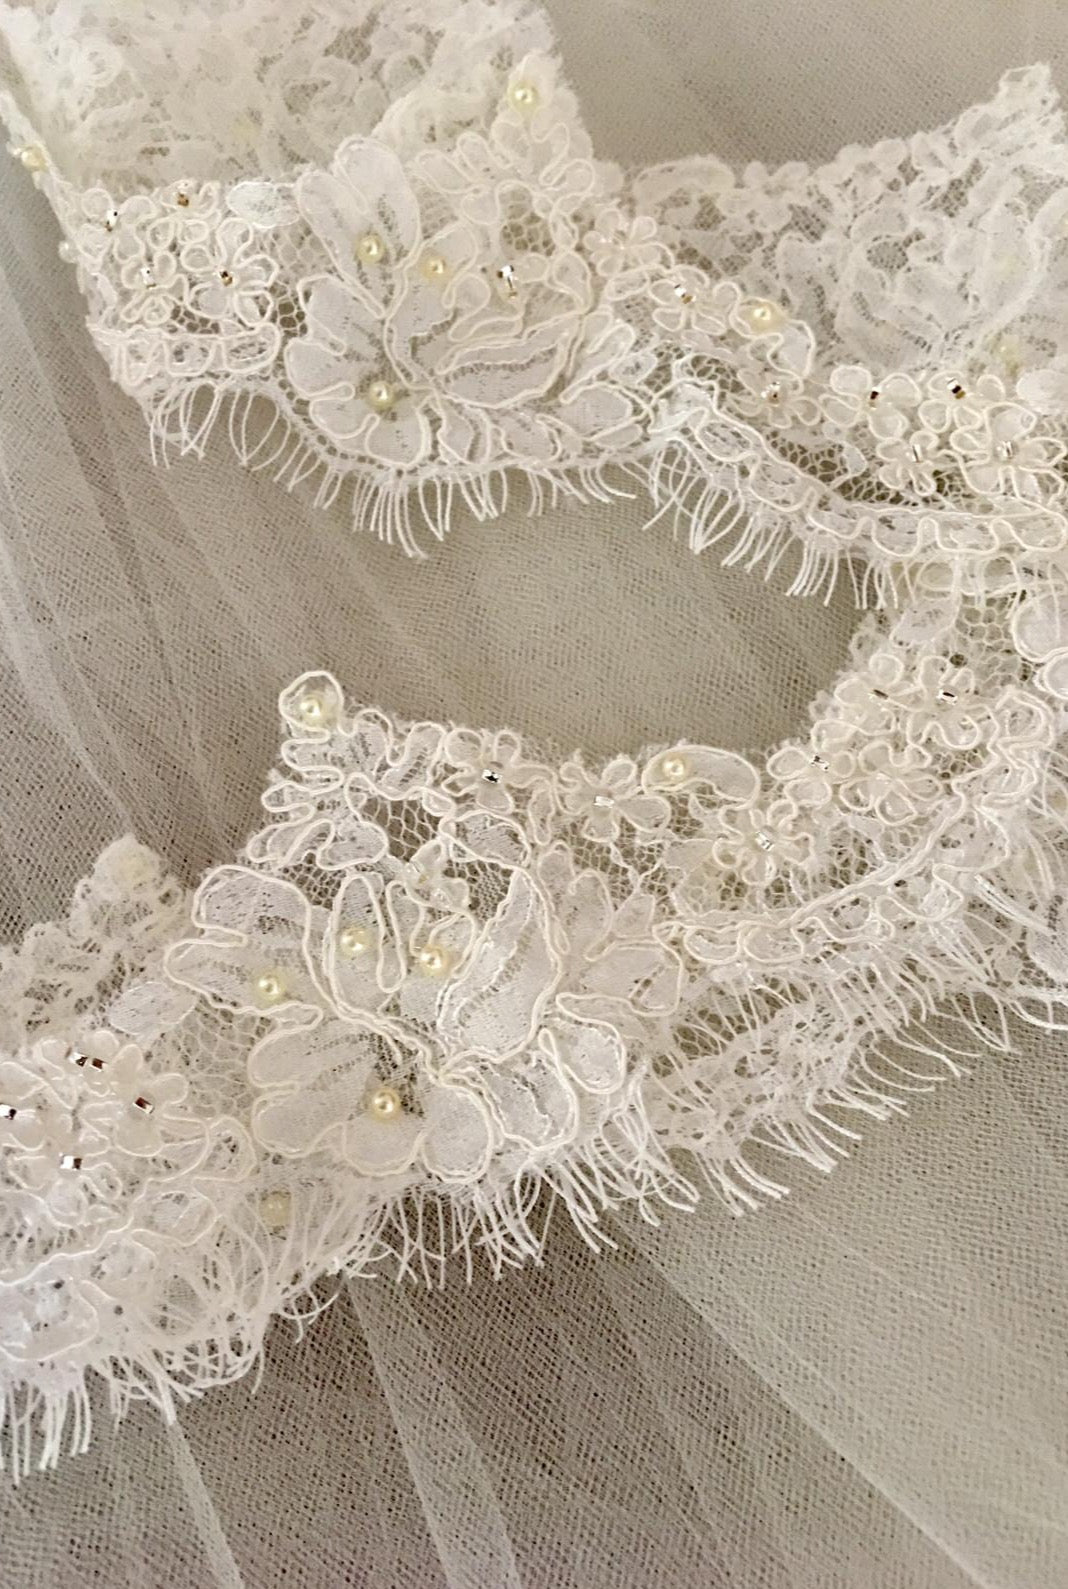 Ivory alencon lace trimming - Lace trim - lace fabric from